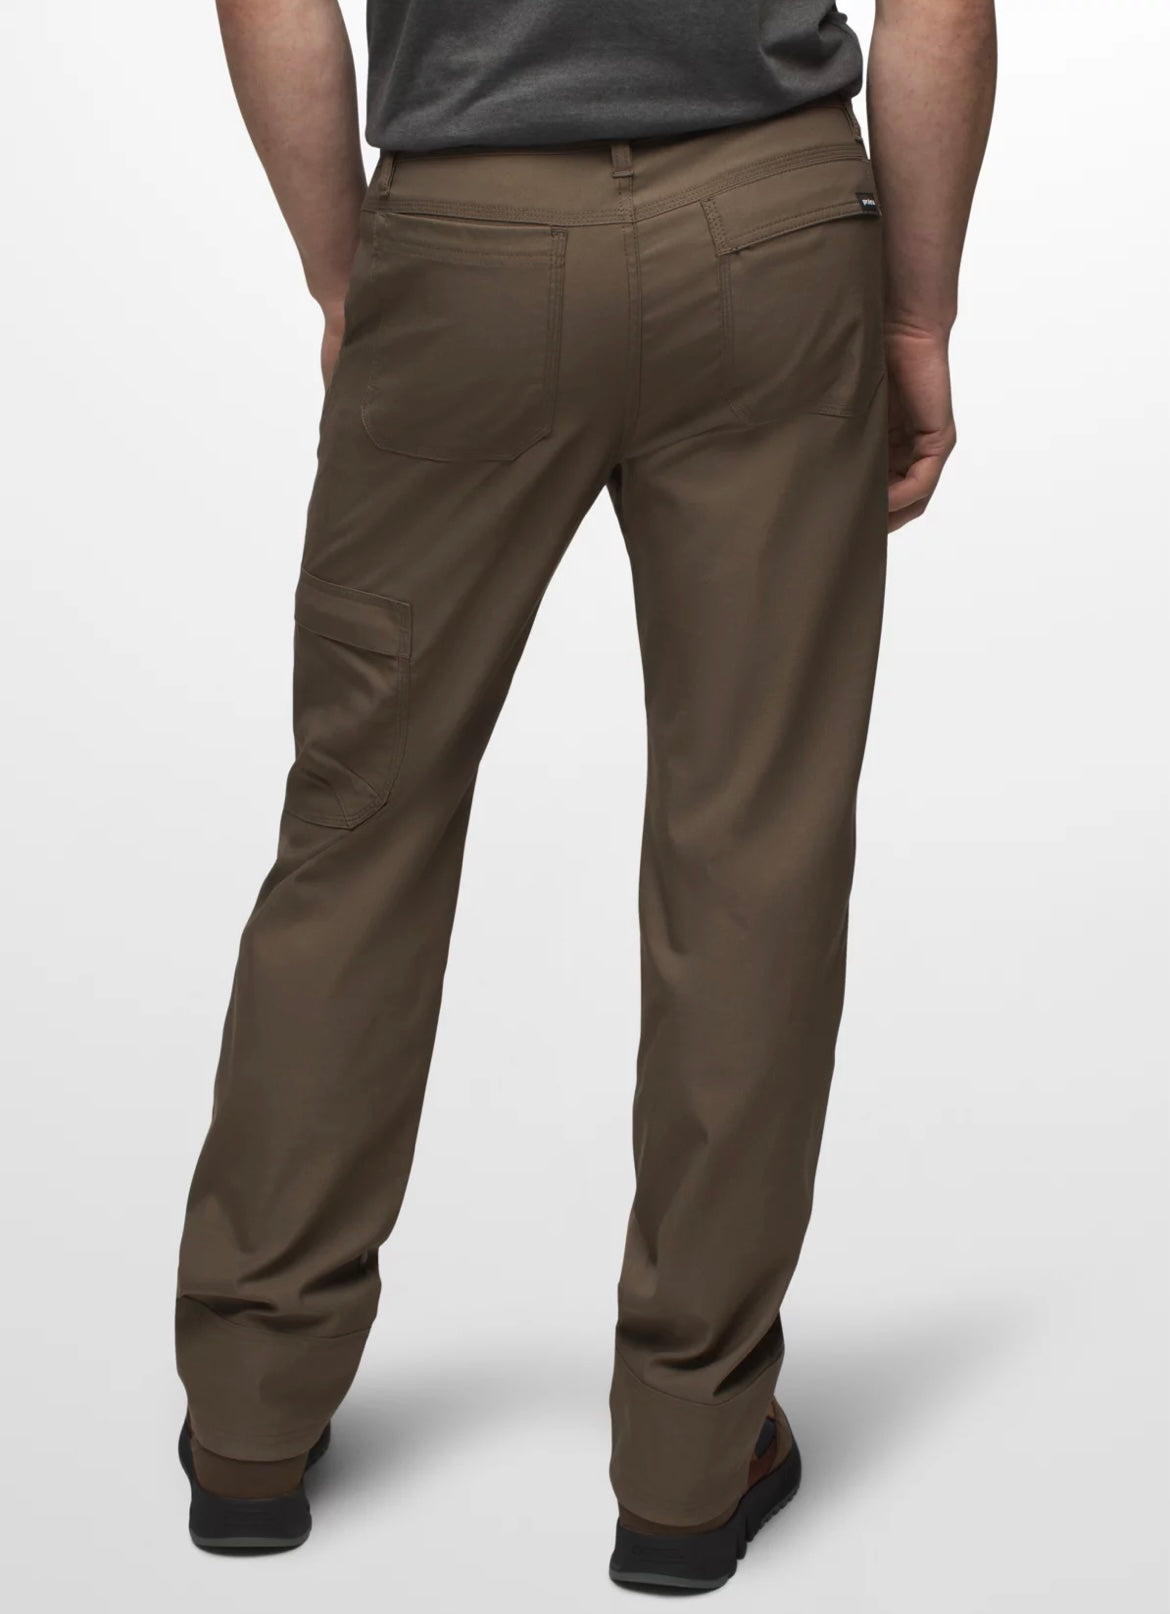 Prana Stretch Zion Pant II – One Tooth Guelph